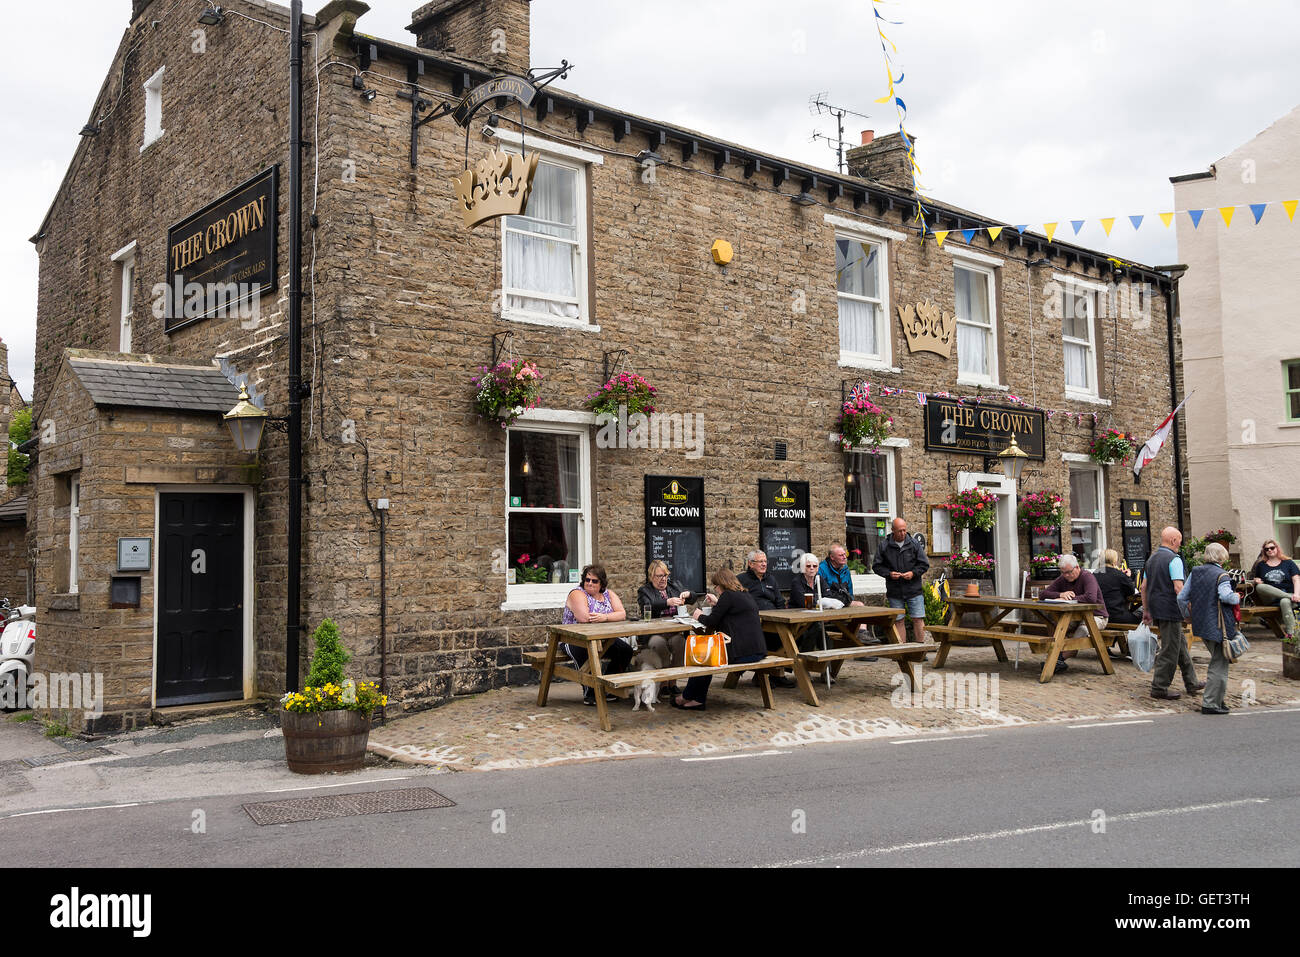 The Crown Public House and Bed and Breakfast Accommodation in Hawes Yorkshire Dales Wensleydale England United Kingdom UK Stock Photo